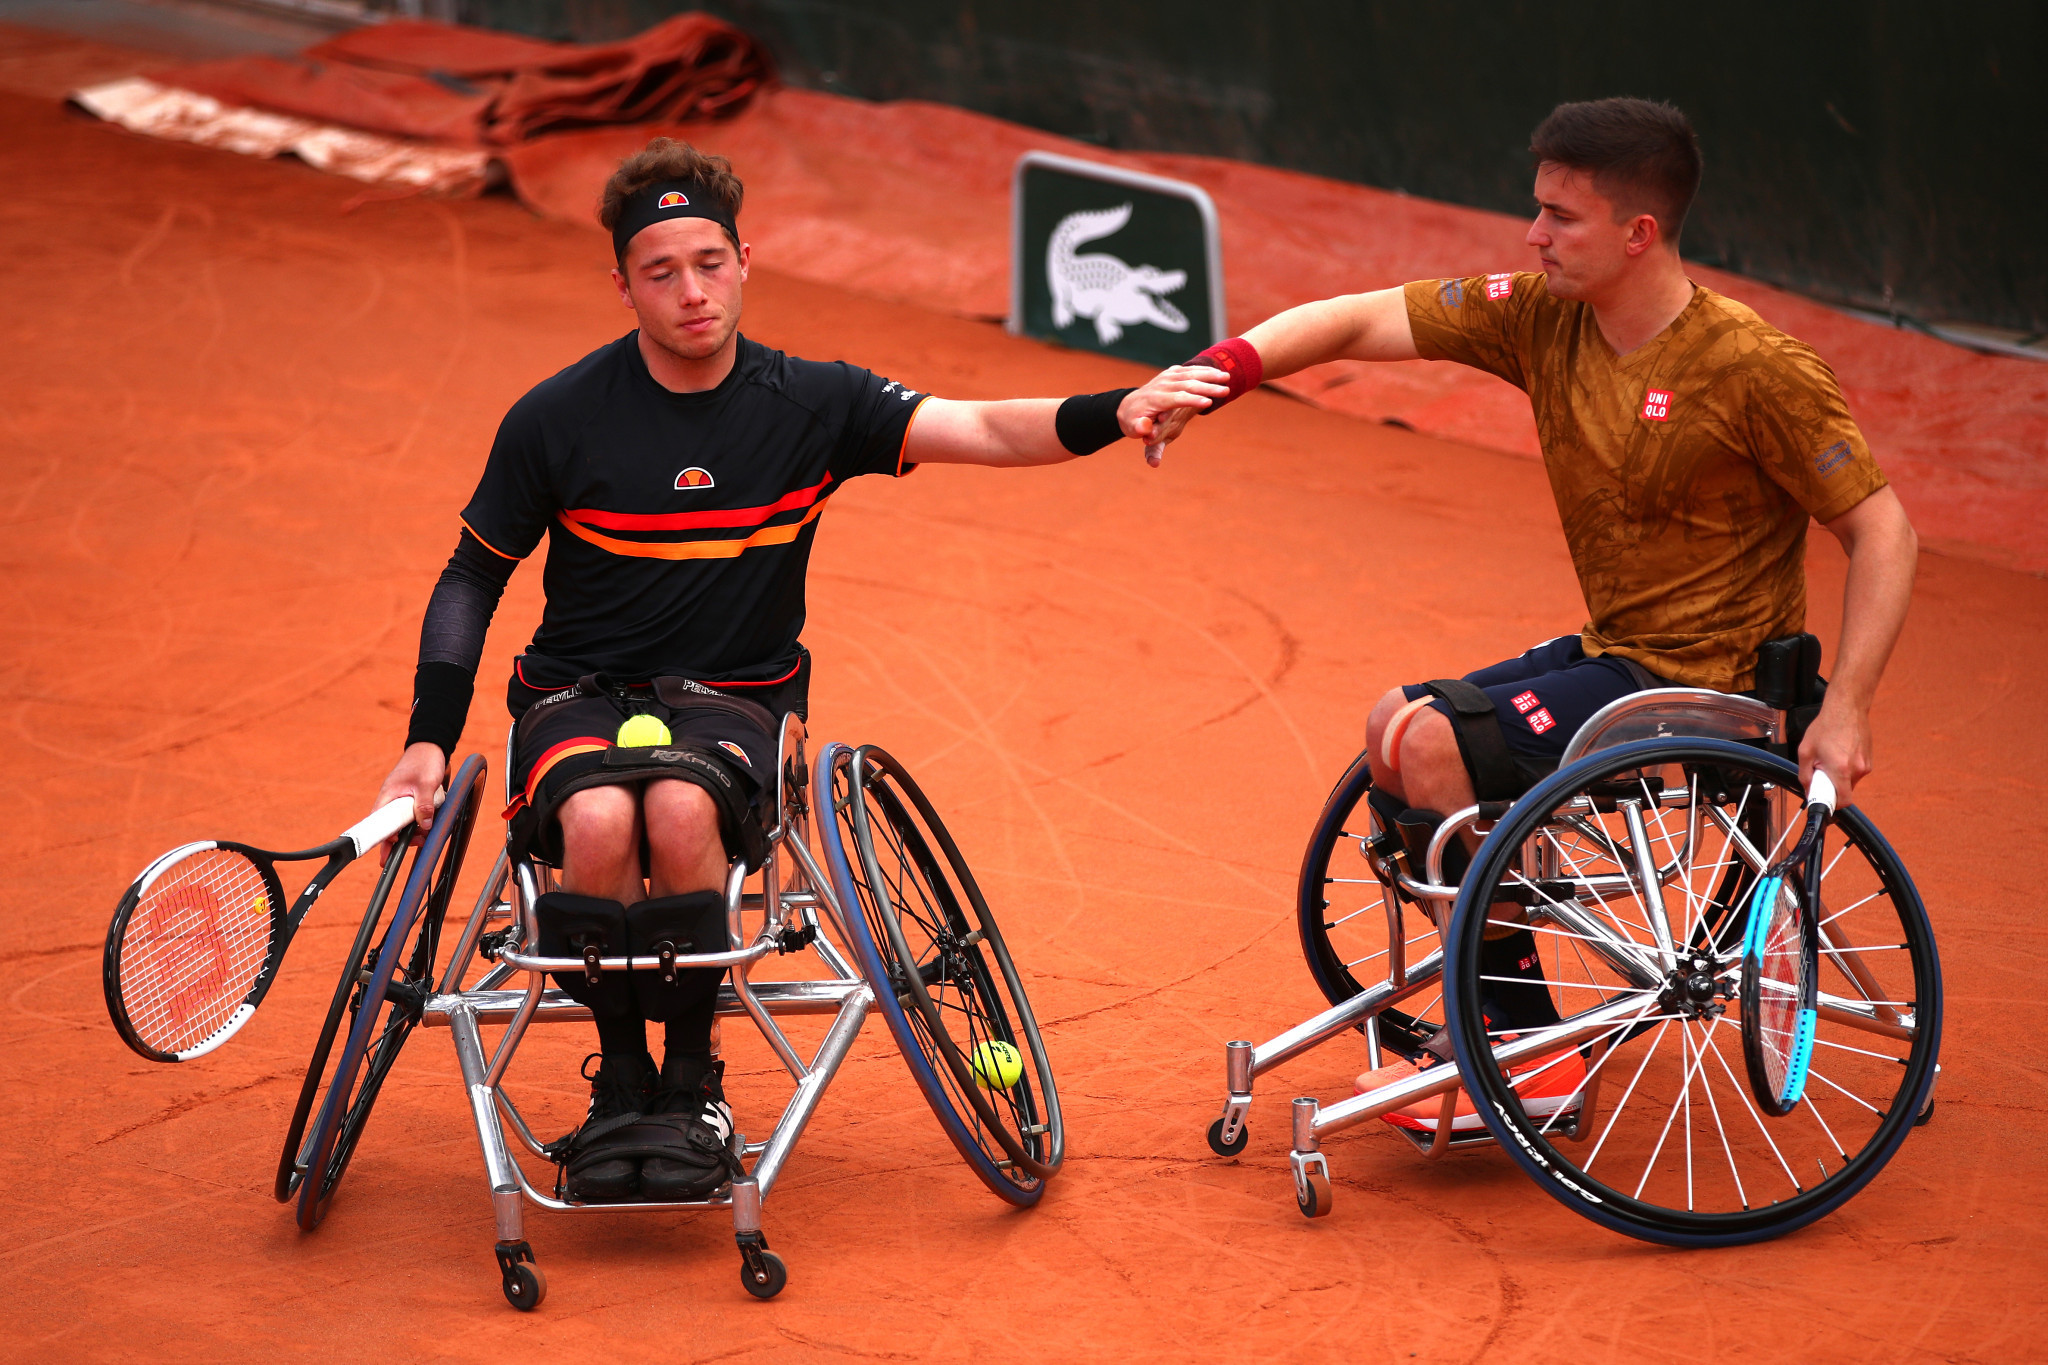 British pair Gordon Reid and Alfie Hewett lost the men's French Open wheelchair doubles final to Gustavo Fernandez of Argentina and Japan's Shingo Kunieda ©Getty Images